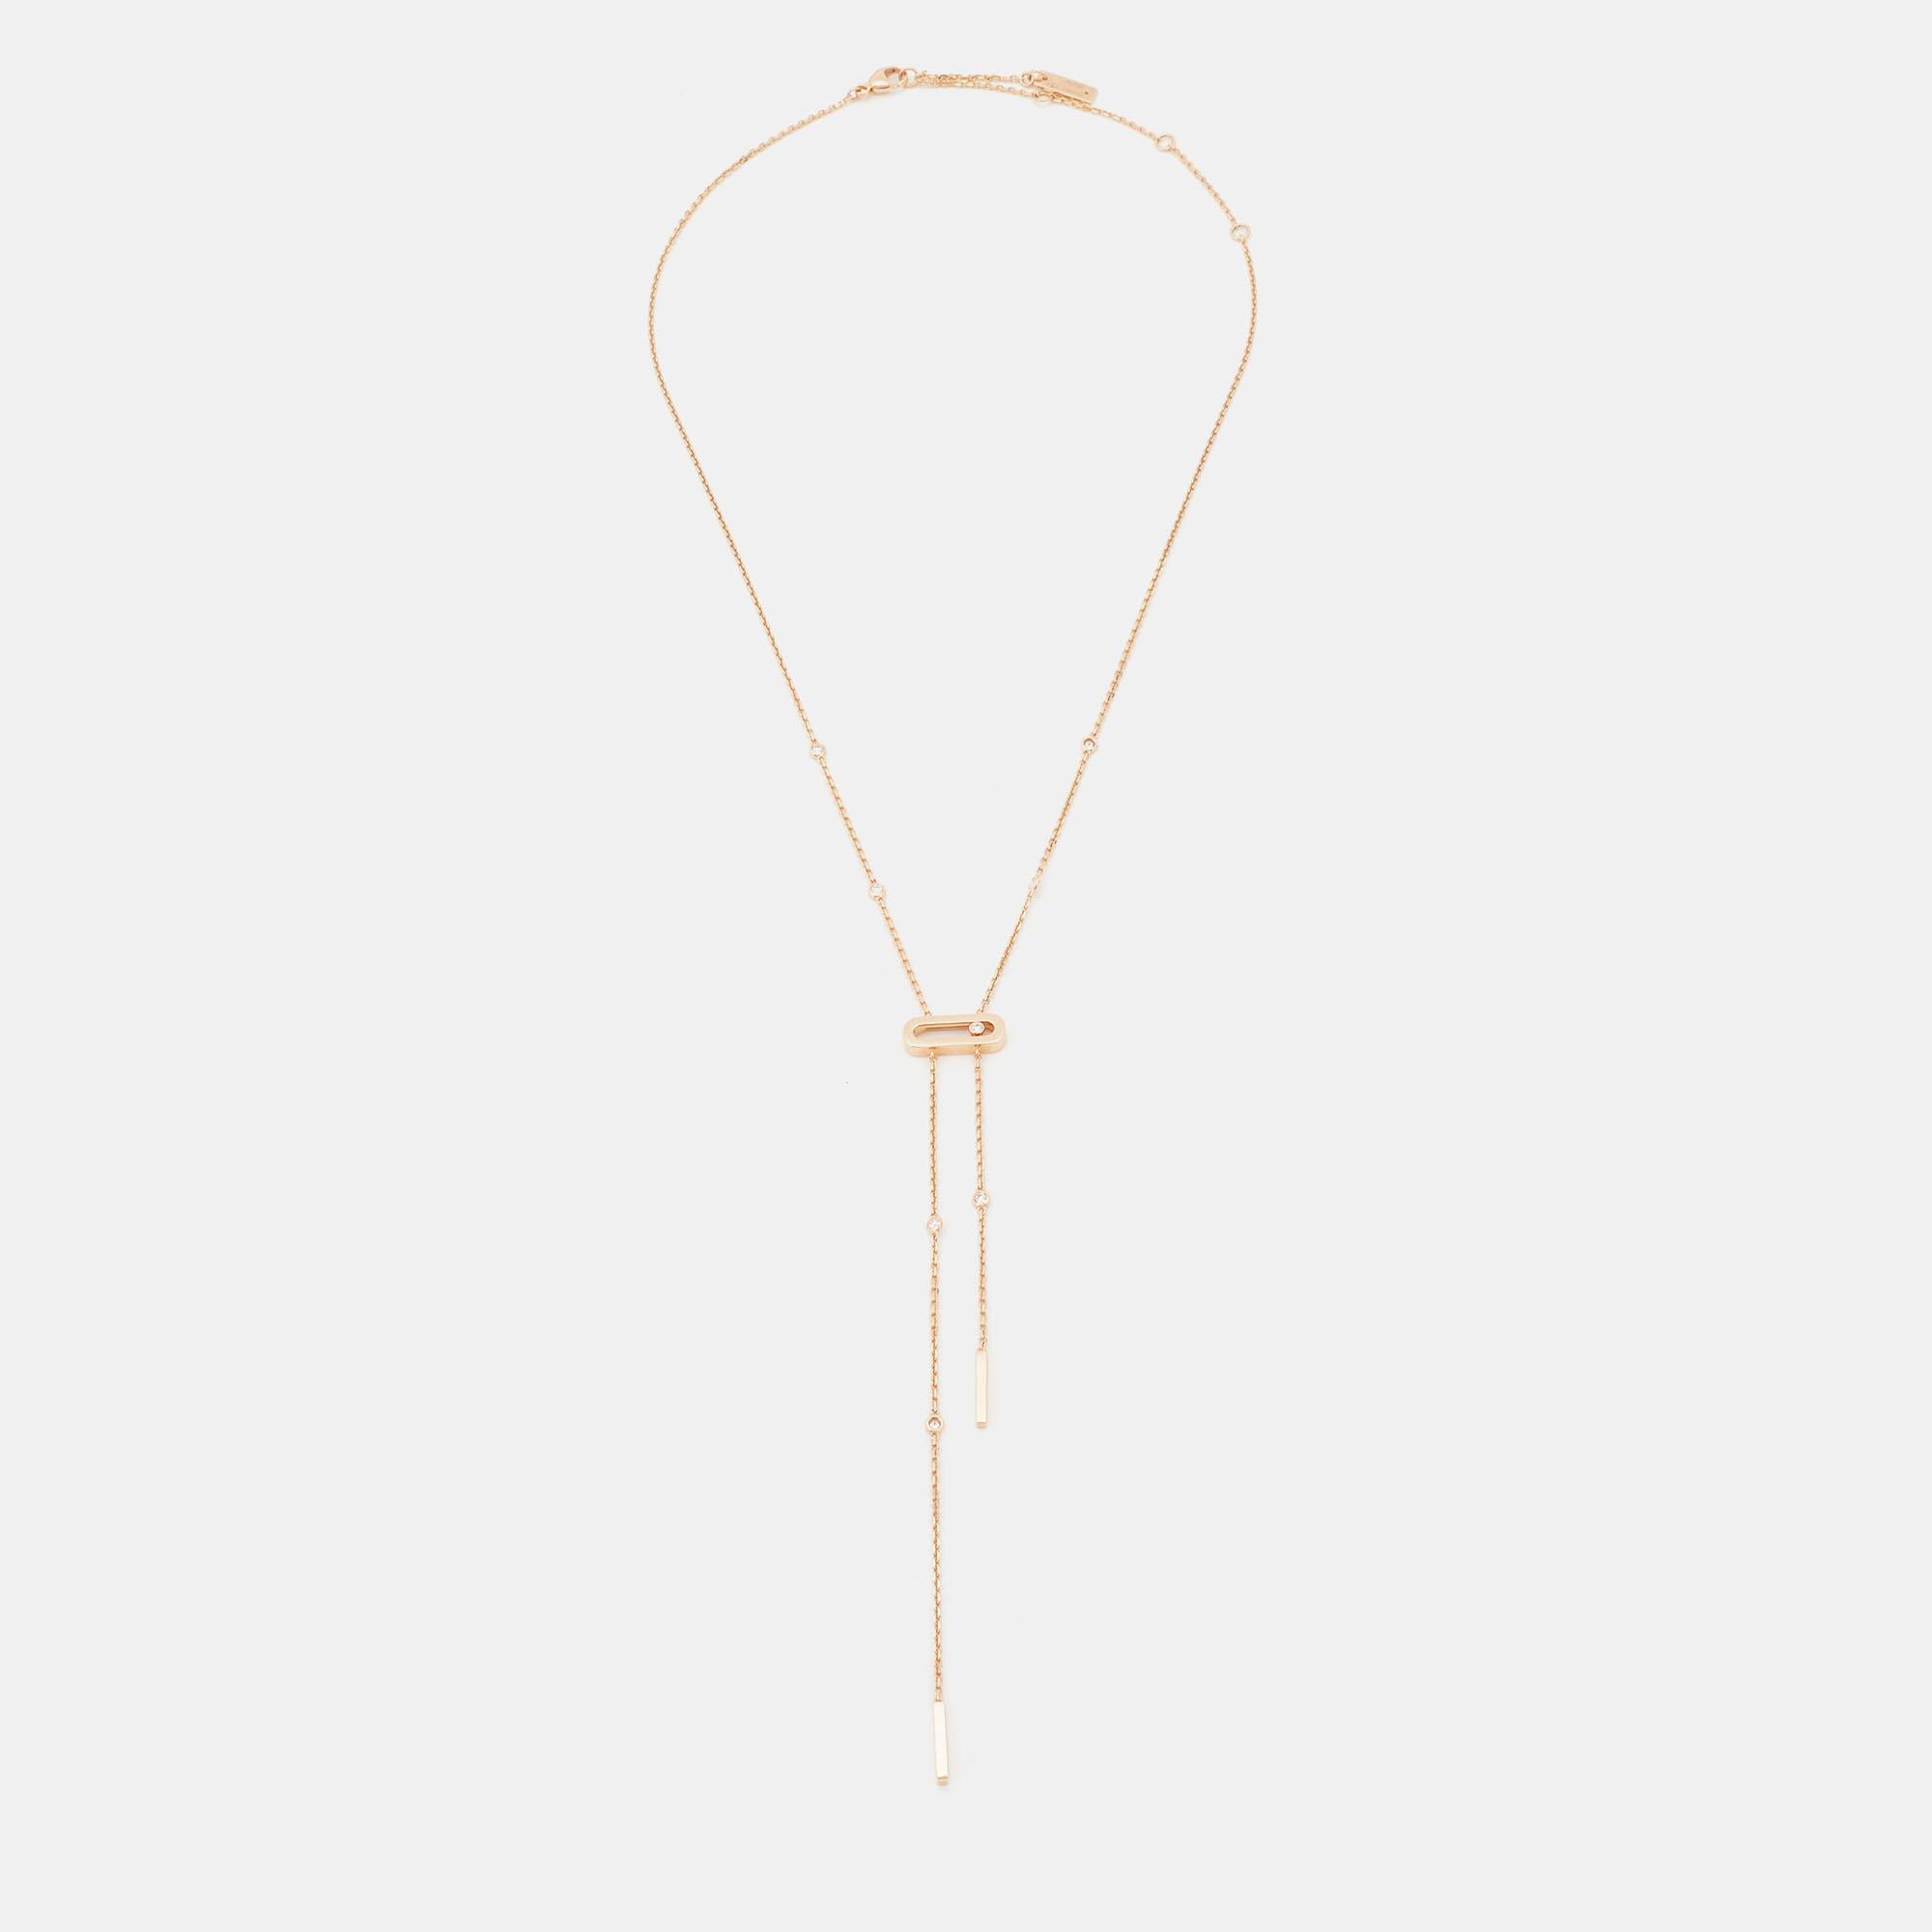 This beautiful Messika Move Uno necklace is fully crafted from 18k rose gold into a design that shows modern aesthetics and unparalleled elegance. The long chain has bezel-set diamonds and a single moving diamond trapped inside the signature